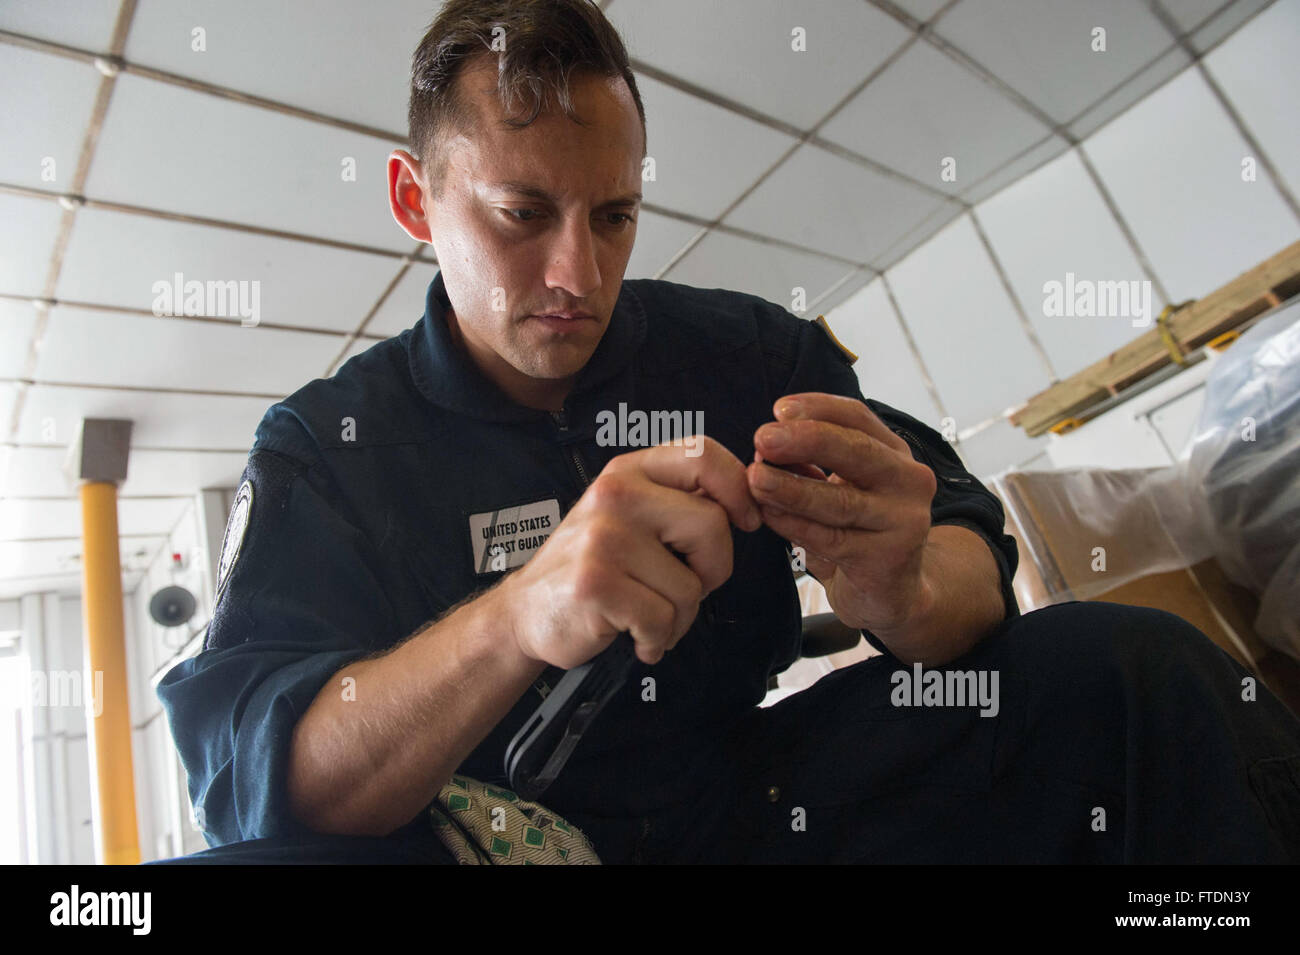 160306-N-QF605-026 GULF OF GUINEA (March 6, 2016) Machinery Technician 2nd Class Paul Avella, a U.S. Coast Guard Law Enforcement Detachment member, performs weapons maintenance aboard USNS Spearhead (T-EPF 1), March 6, 2016. The Military Sealift Command expeditionary fast transport vessel USNS Spearhead is on a scheduled deployment to the U.S. 6th Fleet area of operations to support the international collaborative capacity-building program Africa Partnership Station. (U.S. Navy photo by Mass Communication Specialist 1st Class Amanda Dunford/Released) Stock Photo